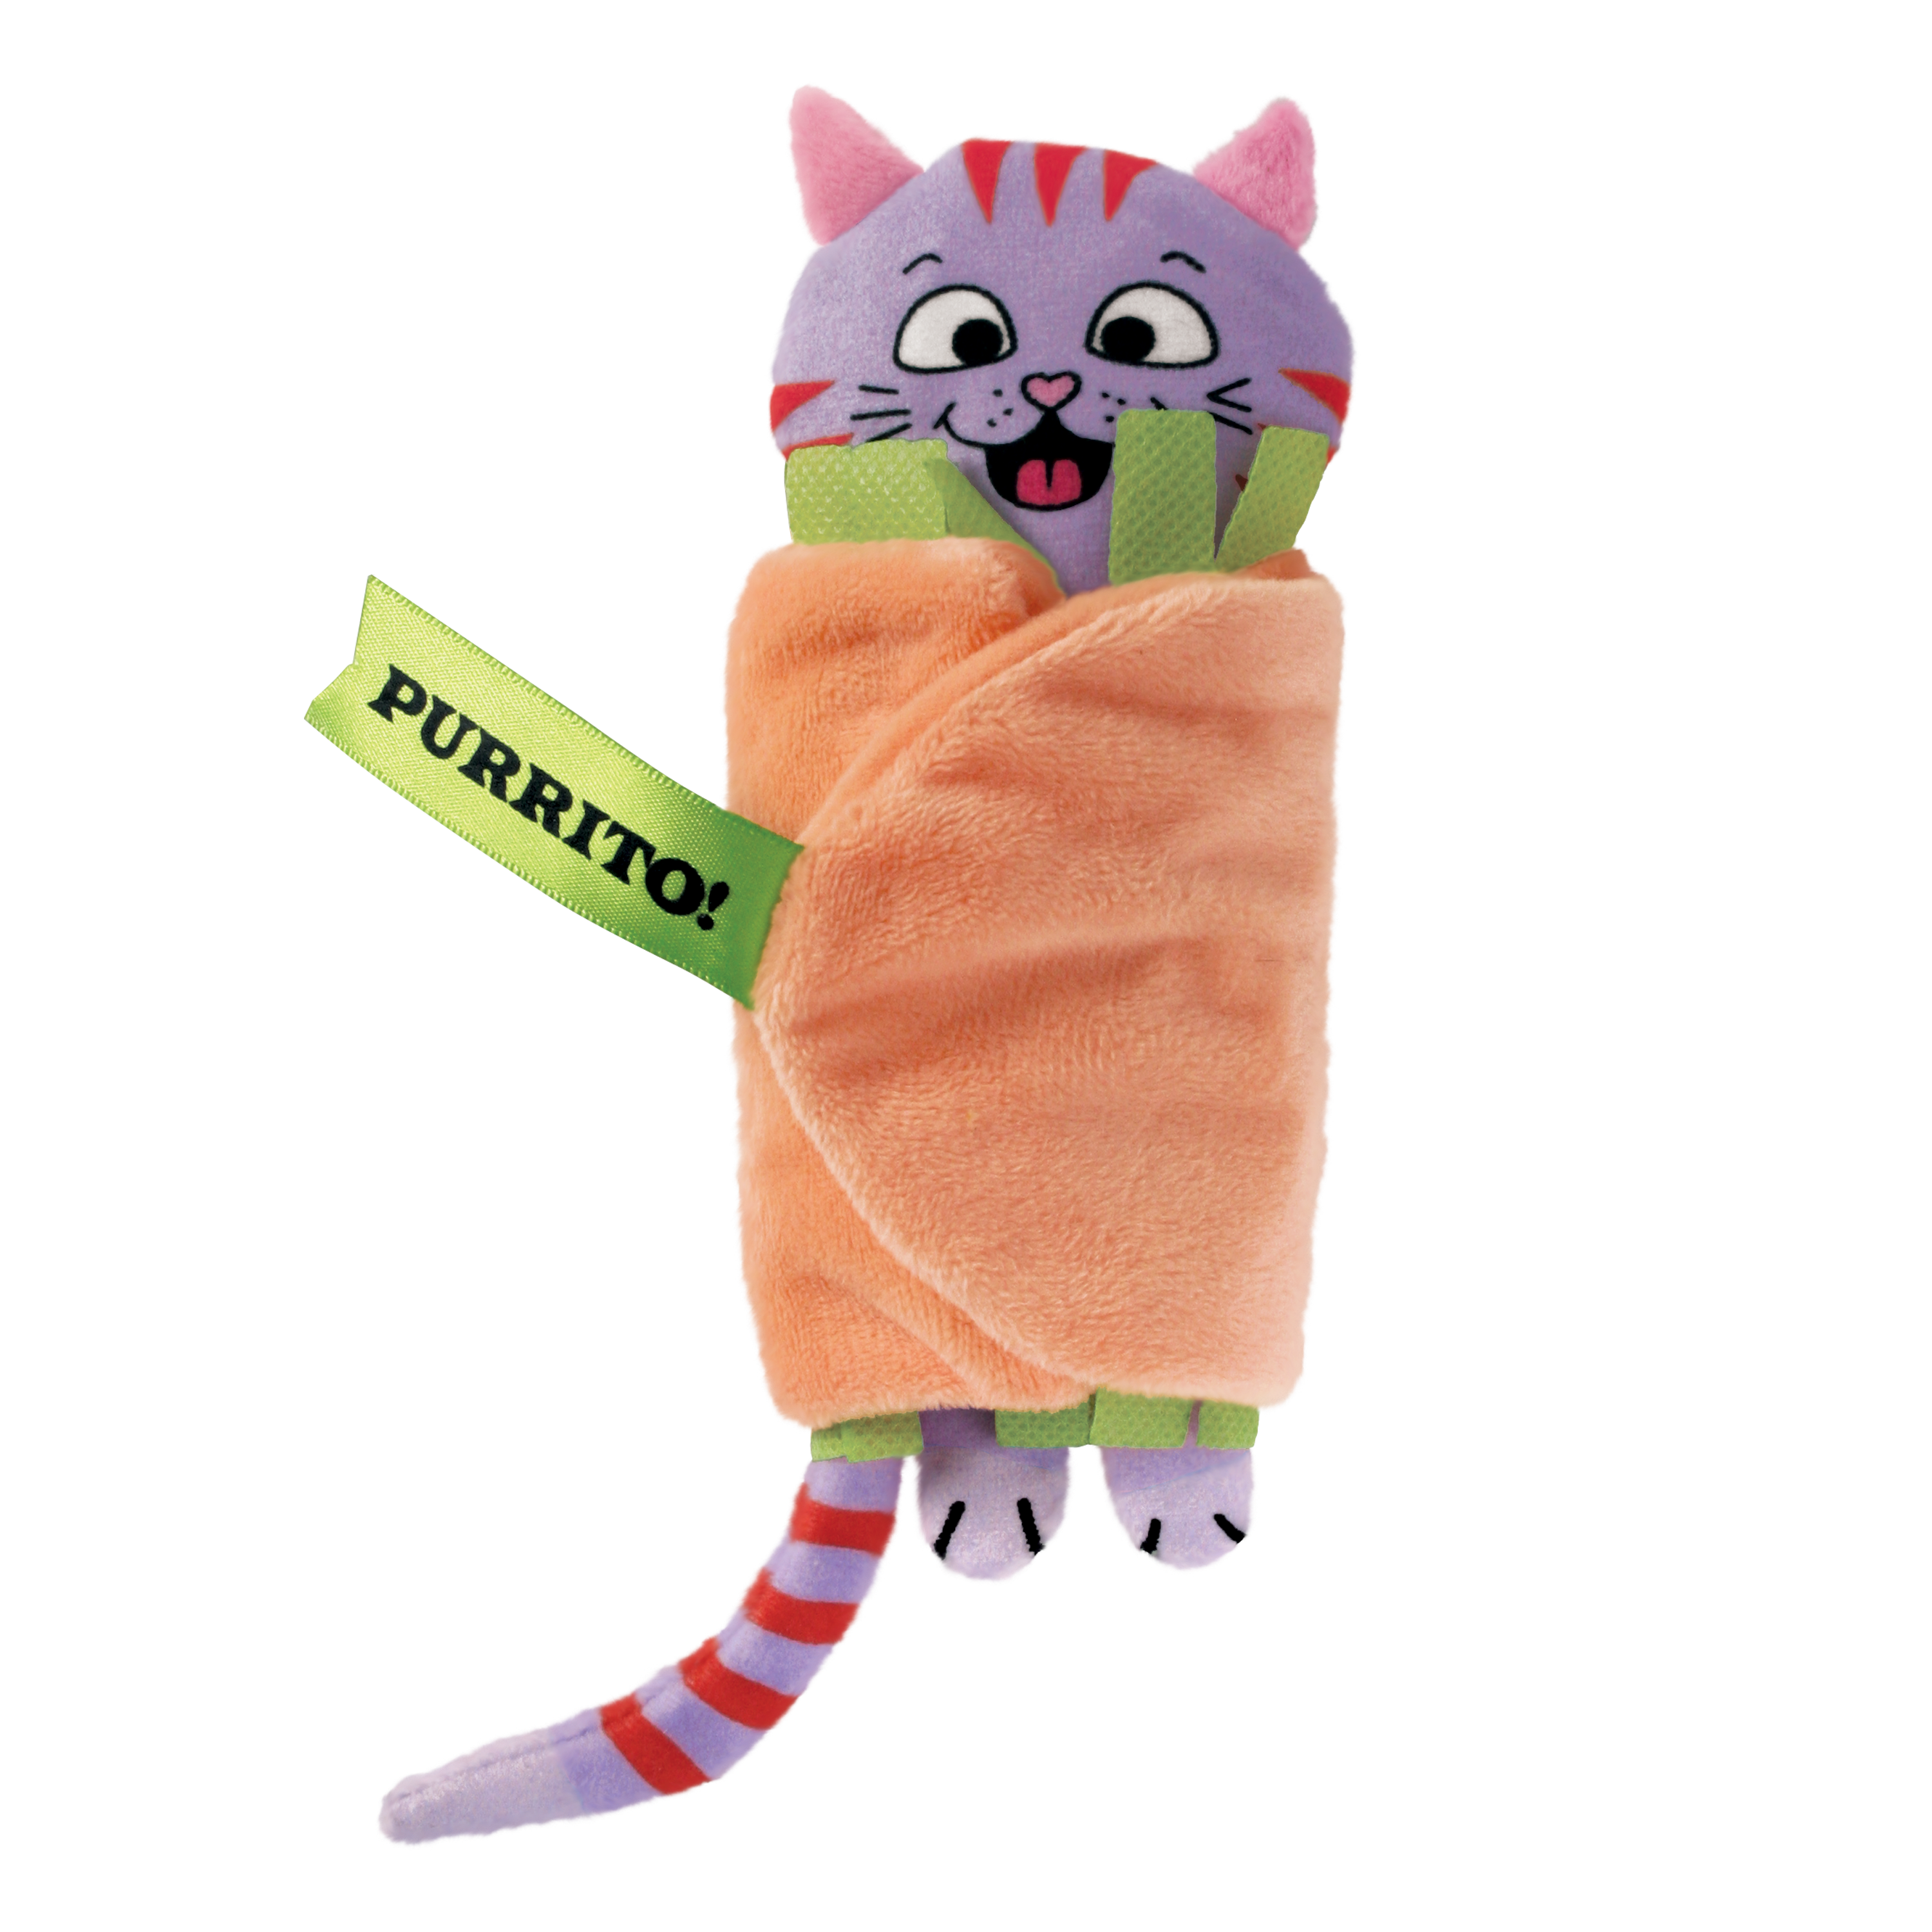 Pull-A-Partz Purrito offpack product image